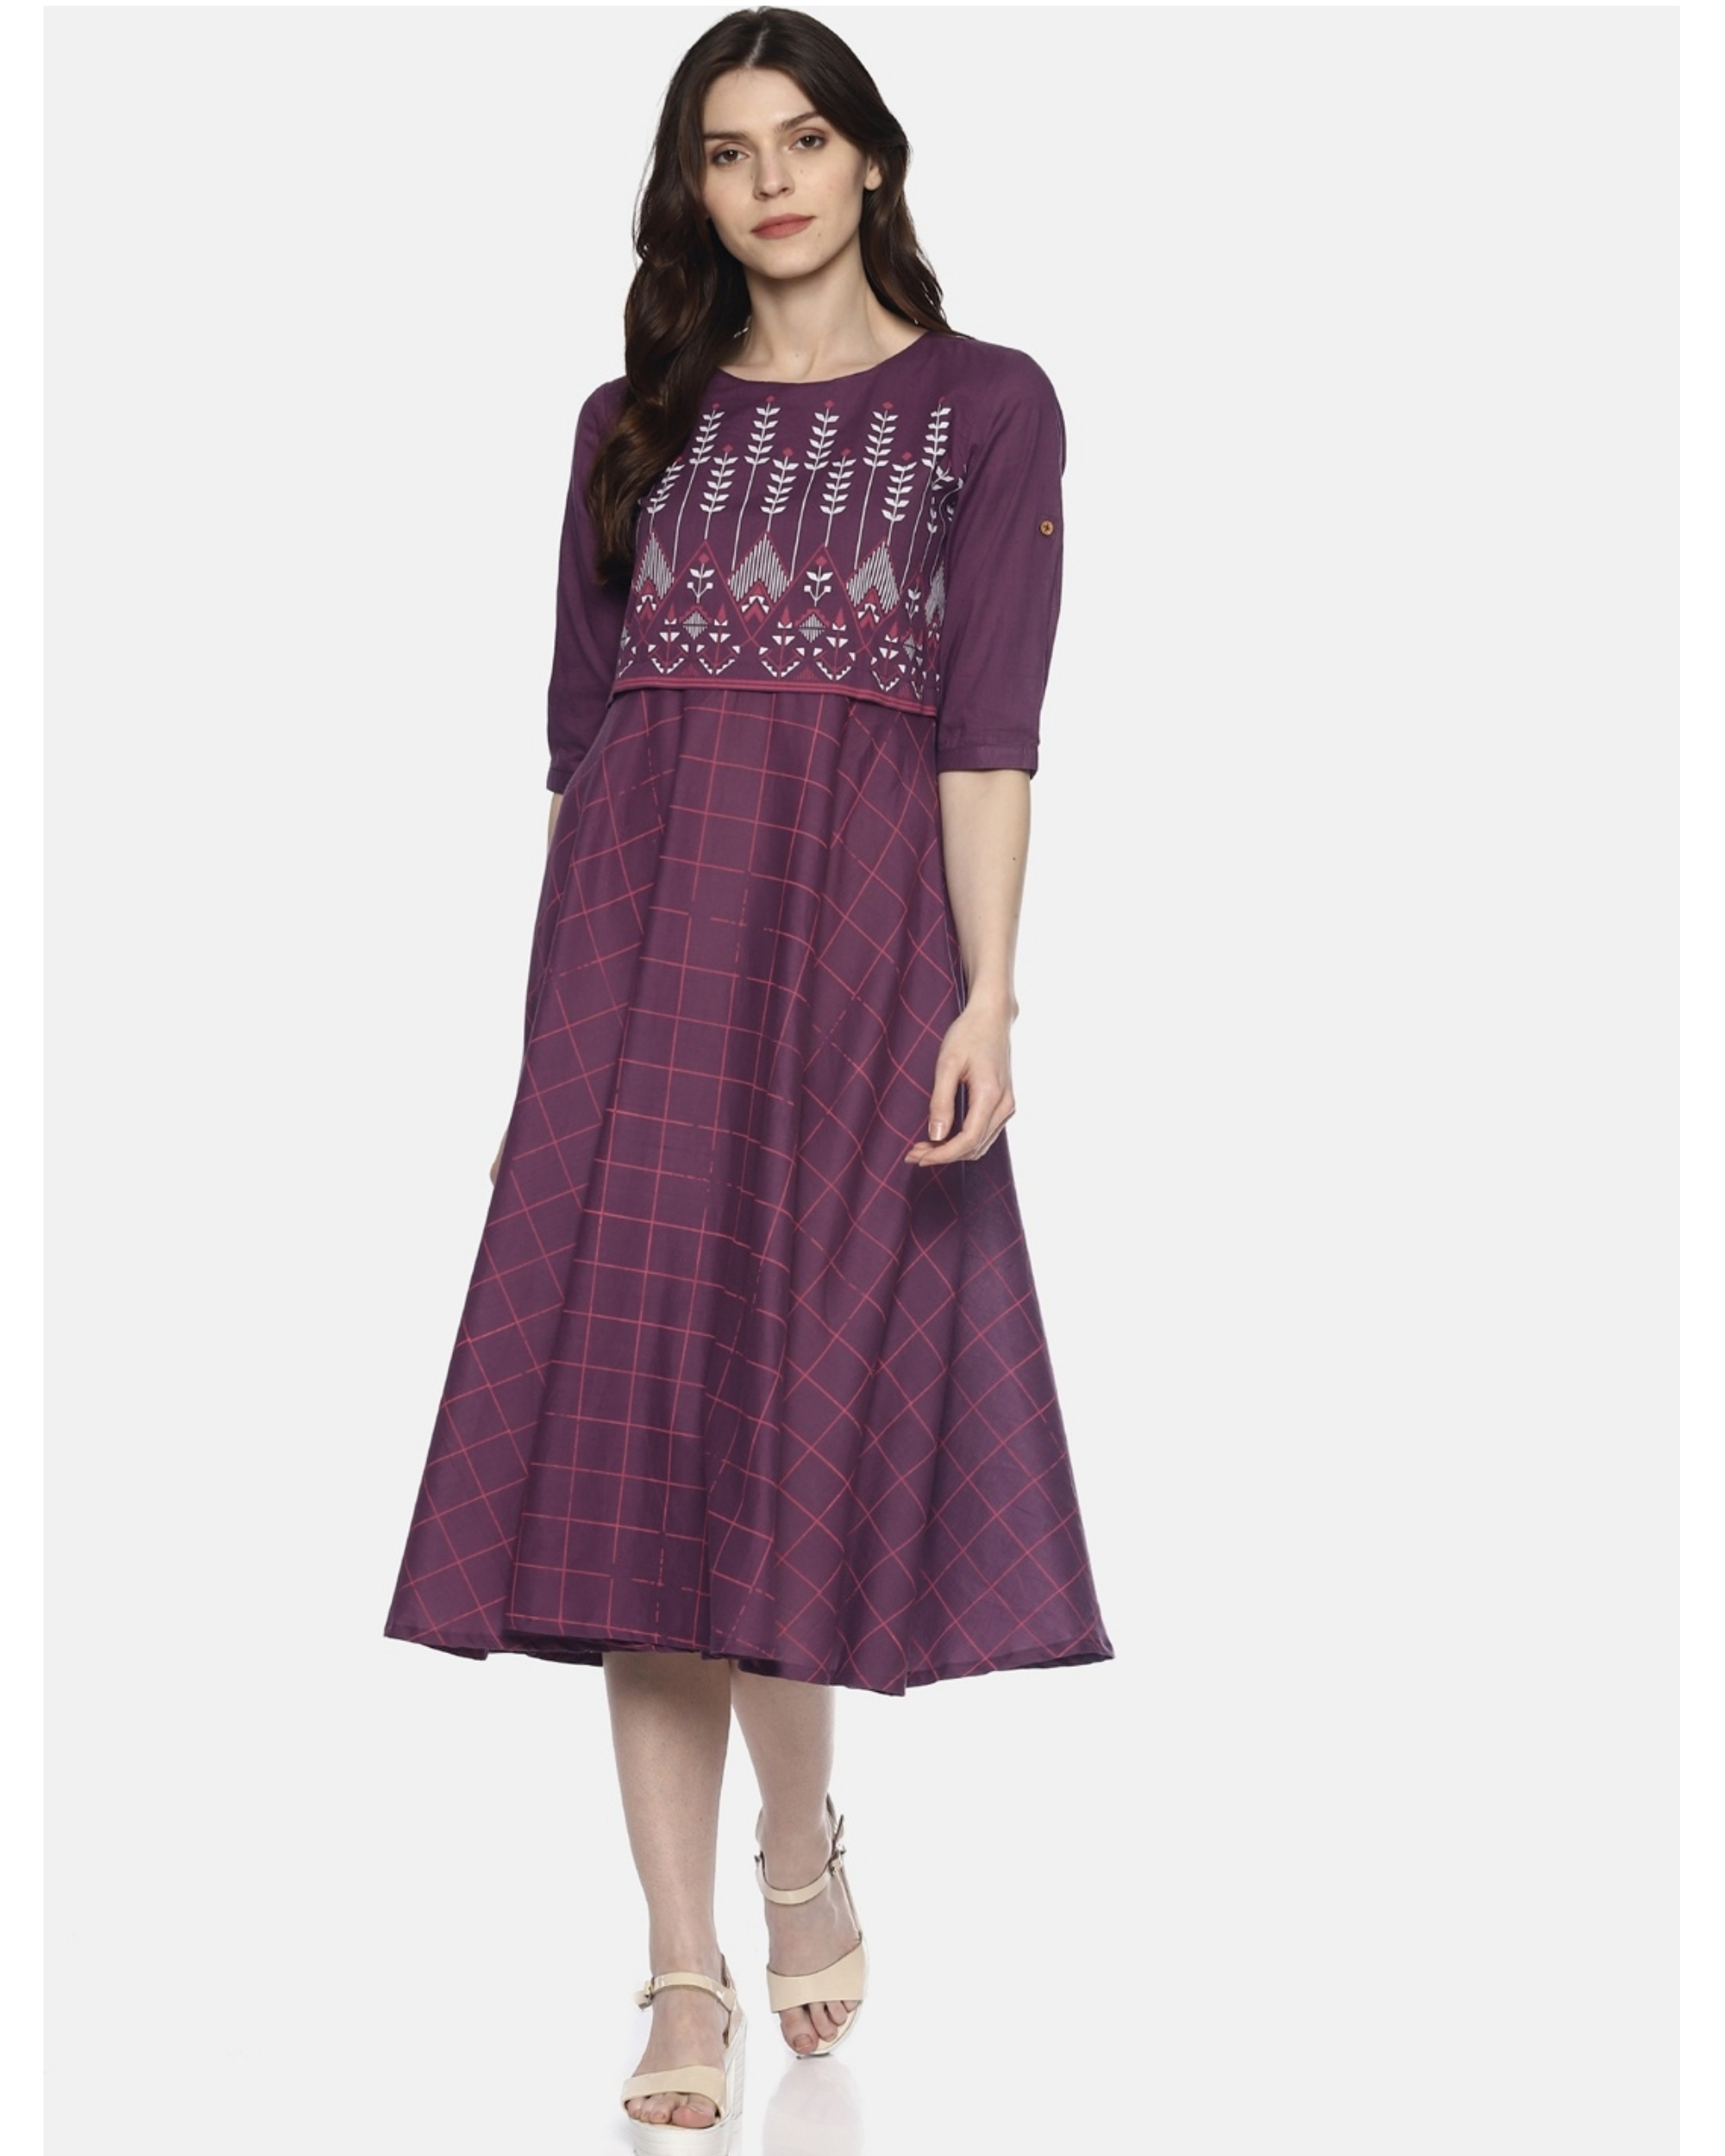 Purple flared printed dress by UNTUNG | The Secret Label